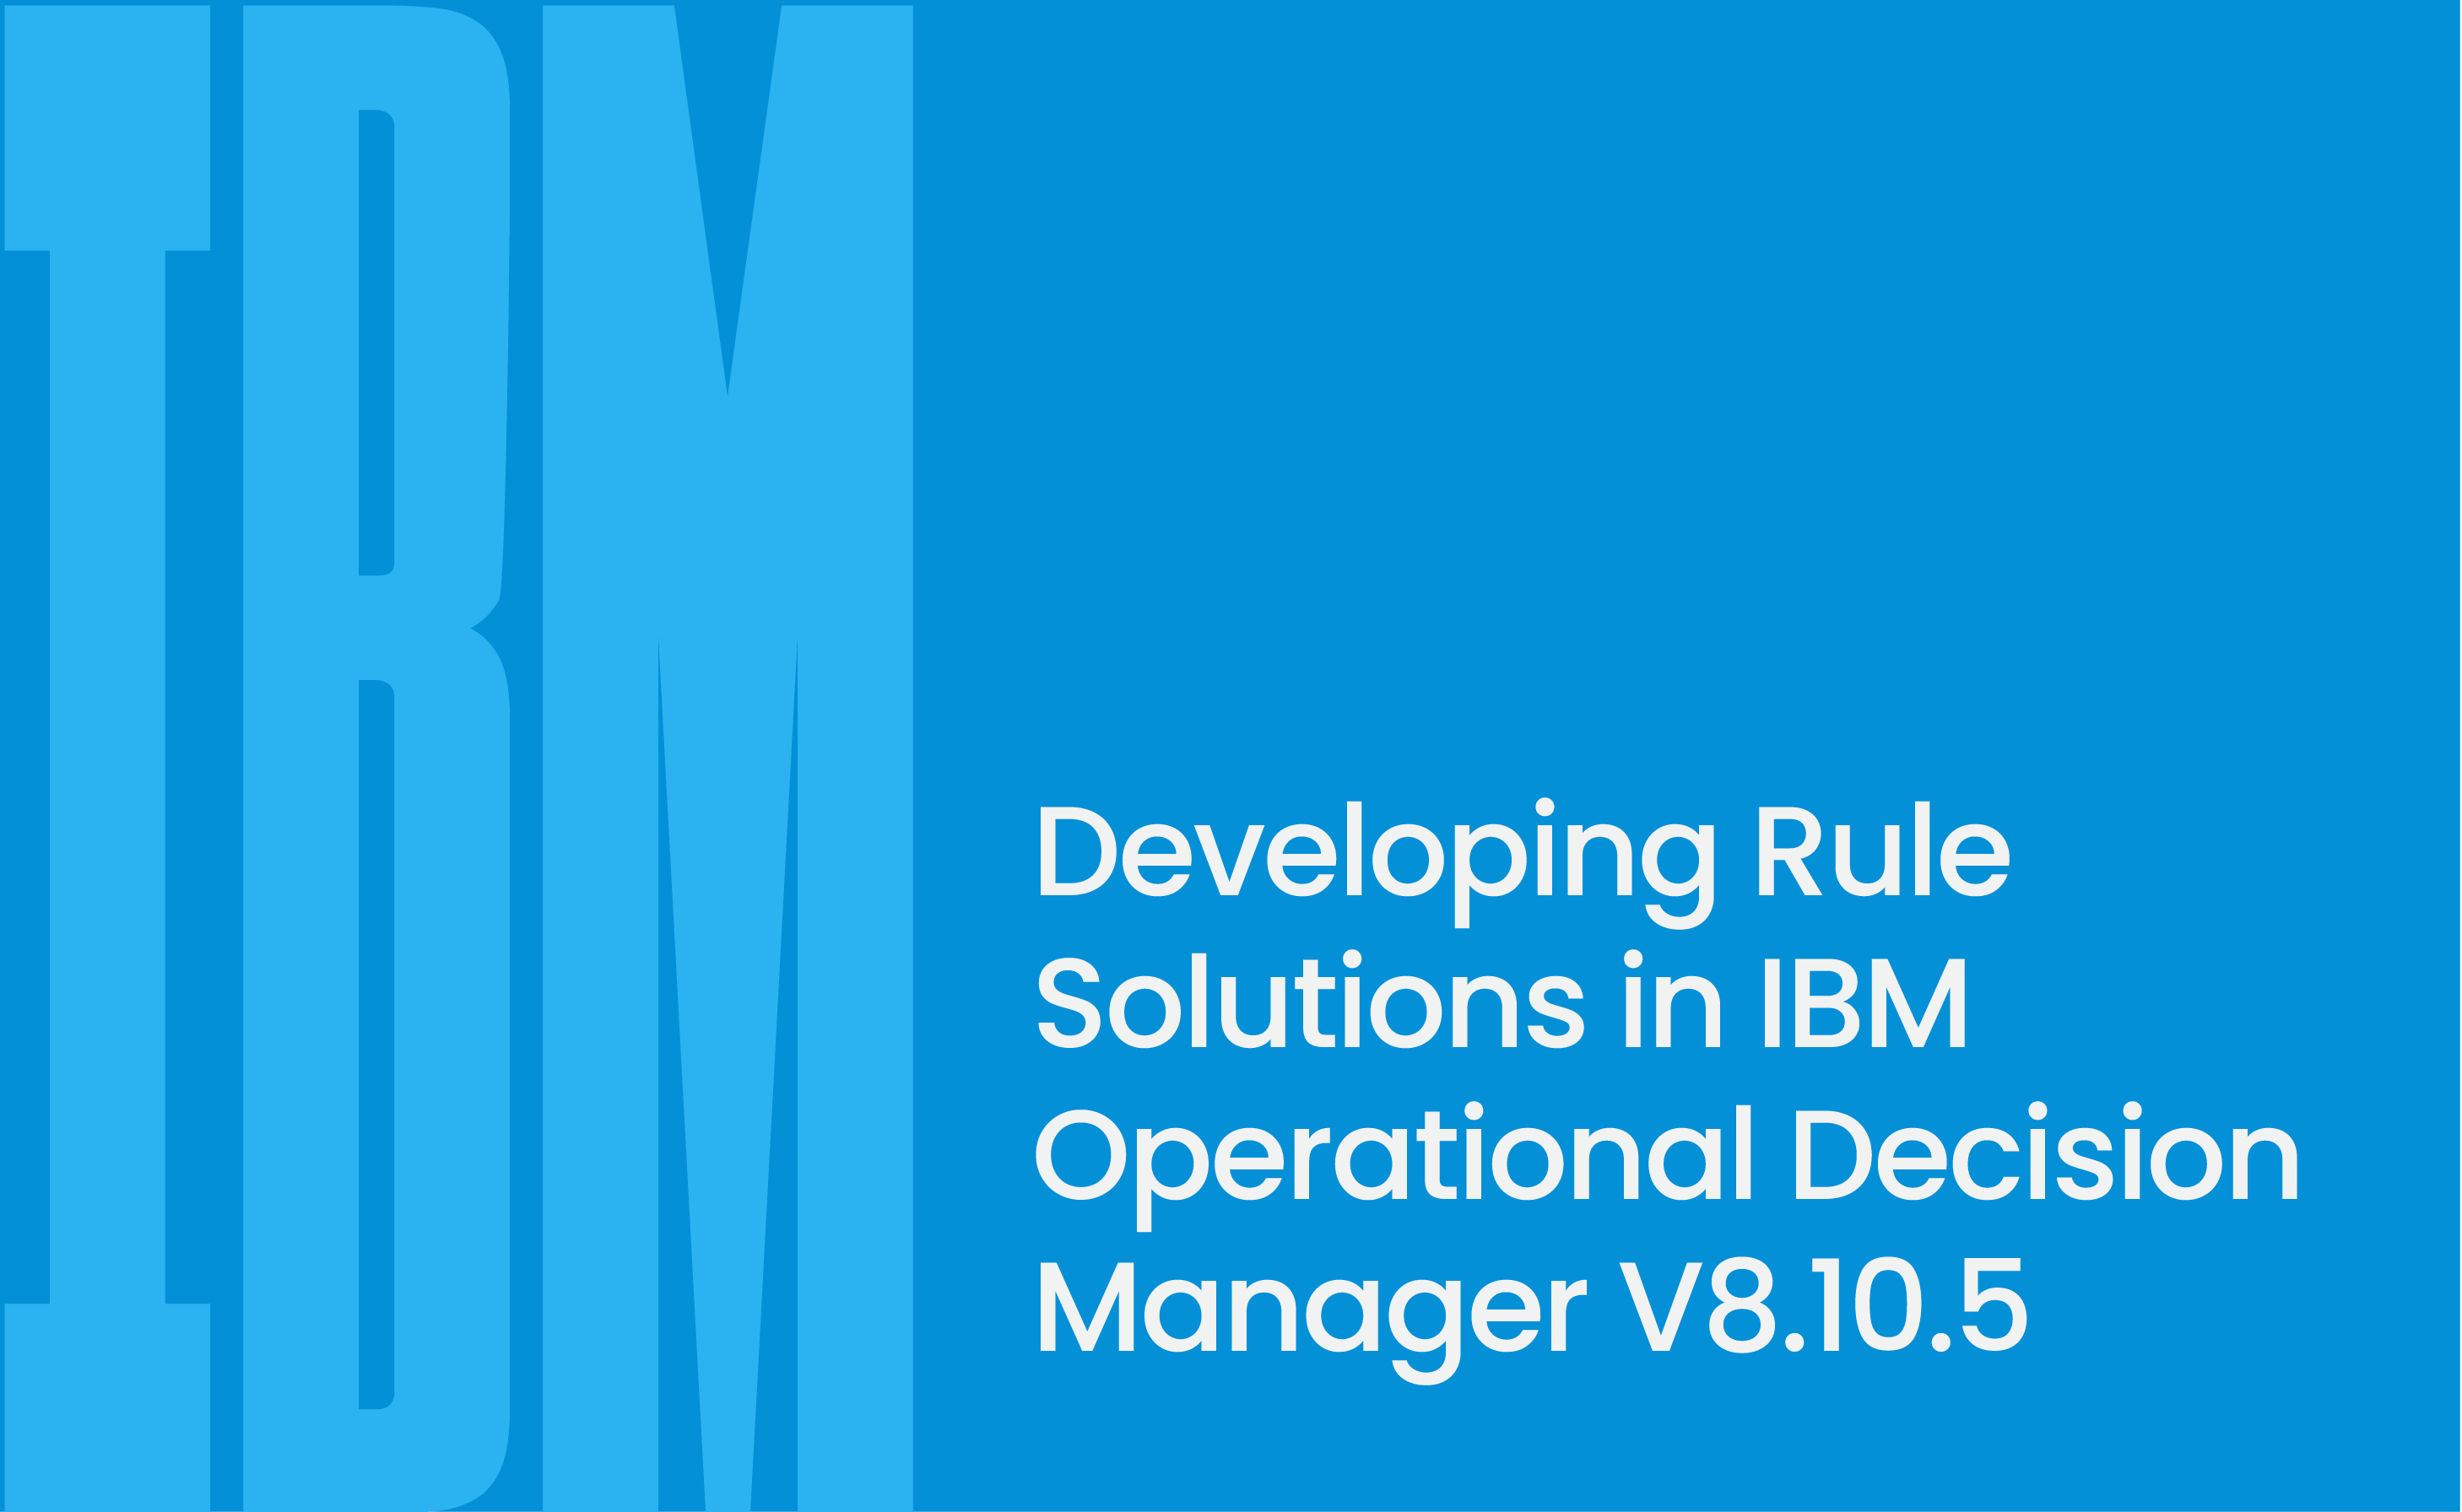 Developing Rule Solutions in IBM Operational Decision Manager V8.10.5